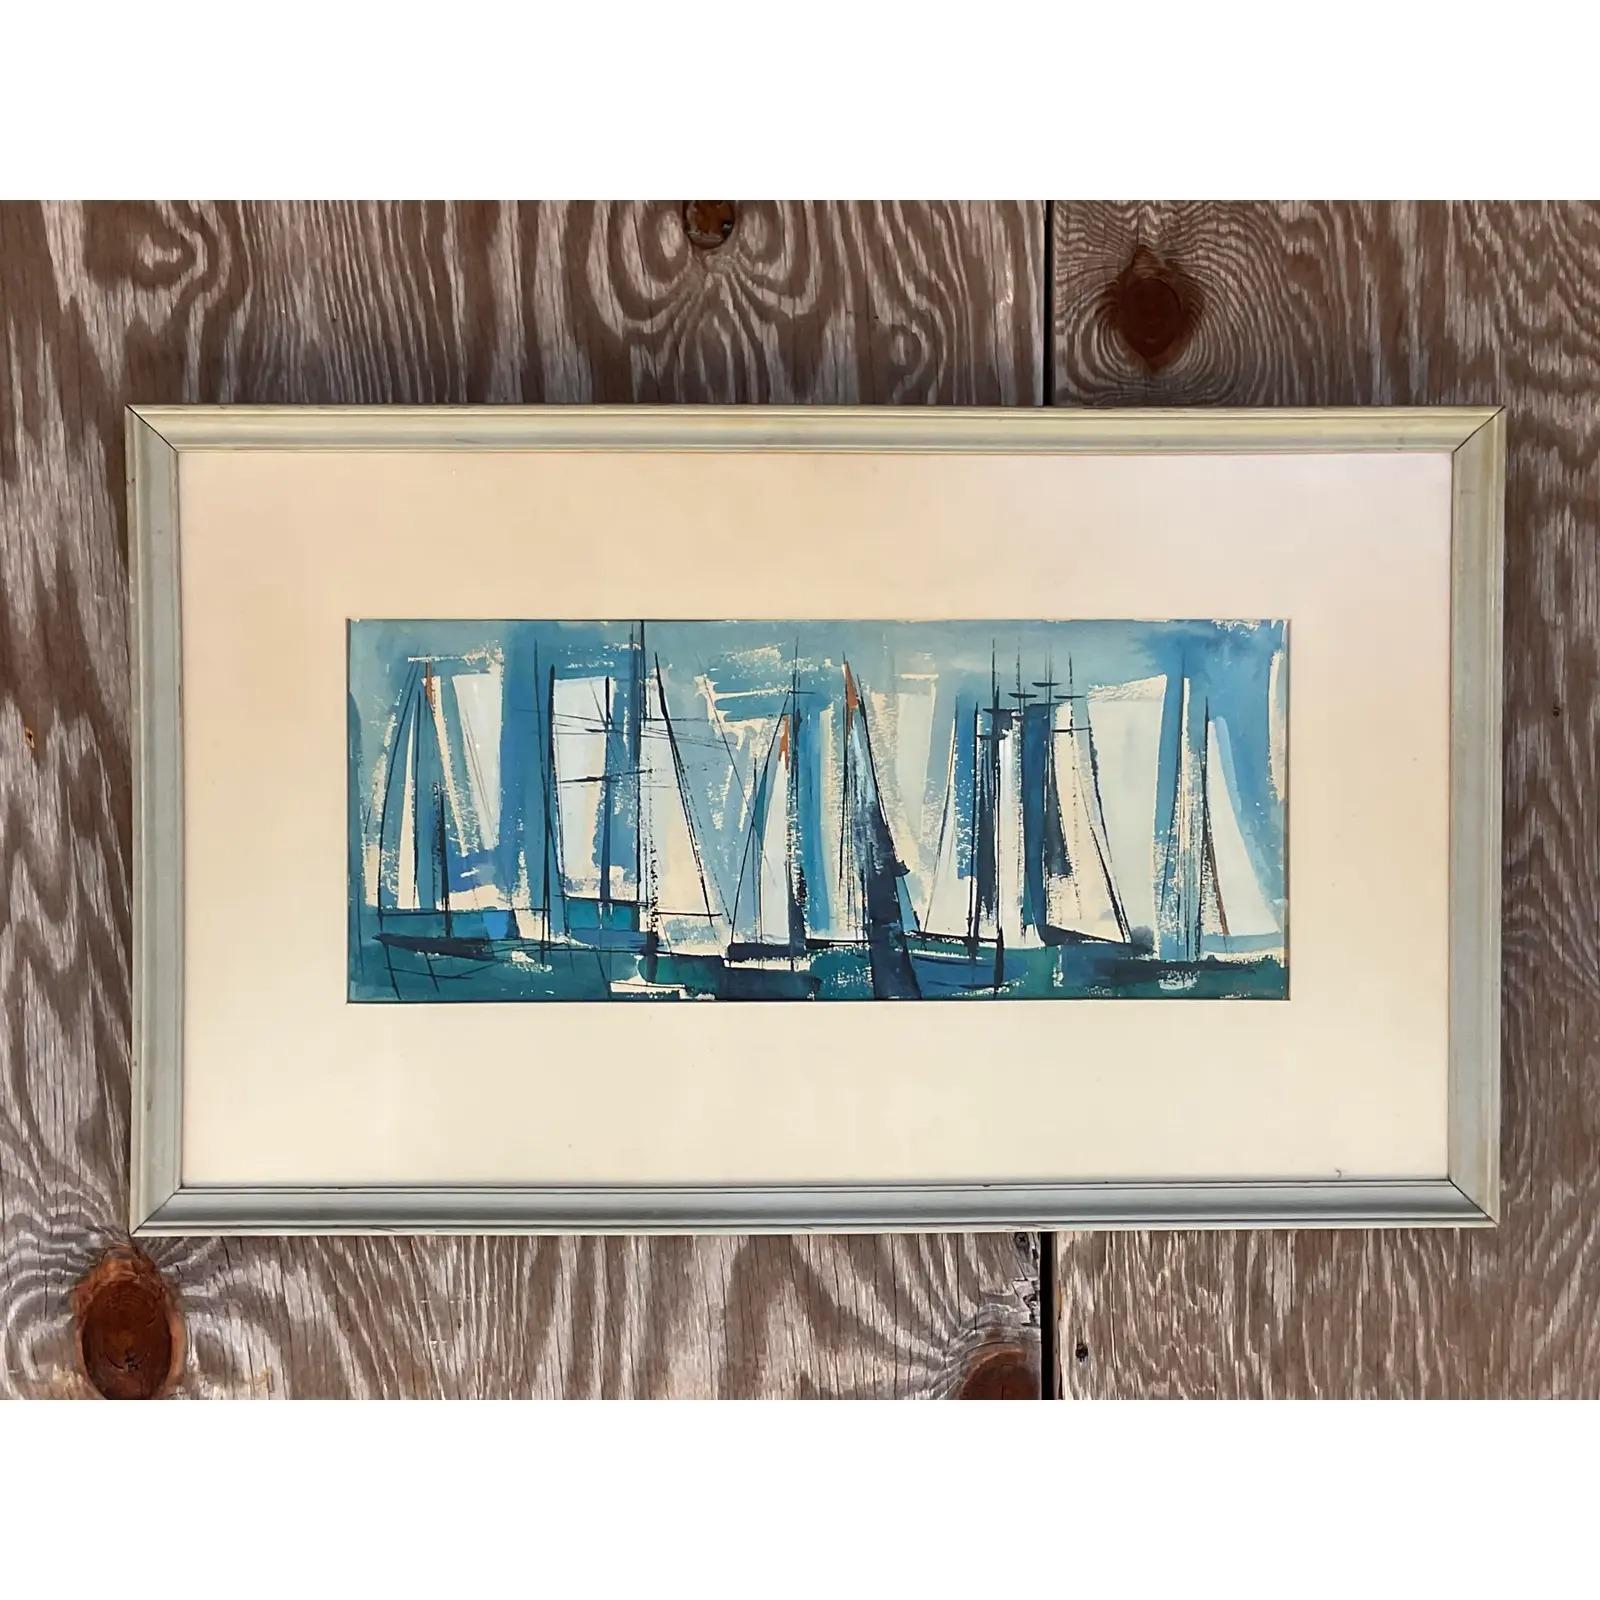 A fantastic vintage Coastal watercolor painting. A beautiful Abstract composition of sailboats in bright clear colors. Signed. Acquired from a Palm Beach estate.